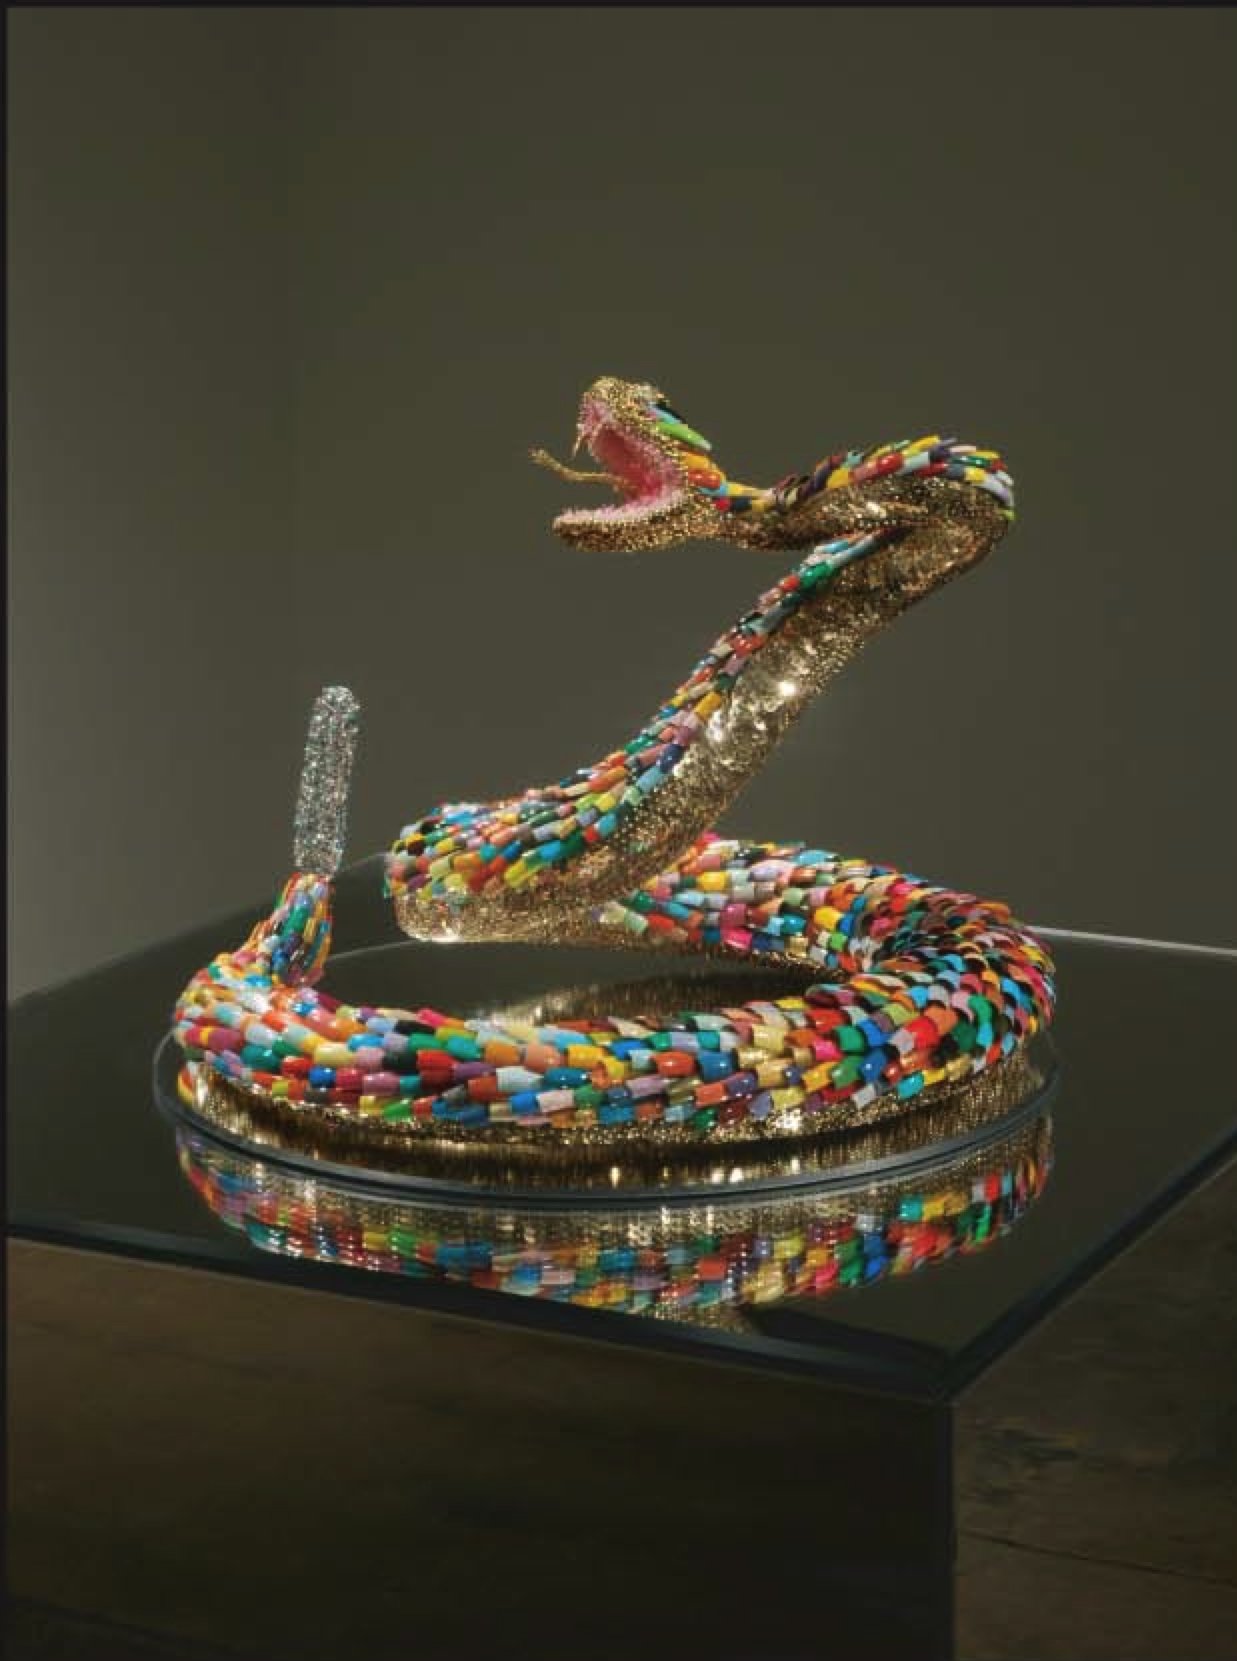 A sculpture of a snake with its body coiled and its mouth open as if to strike.